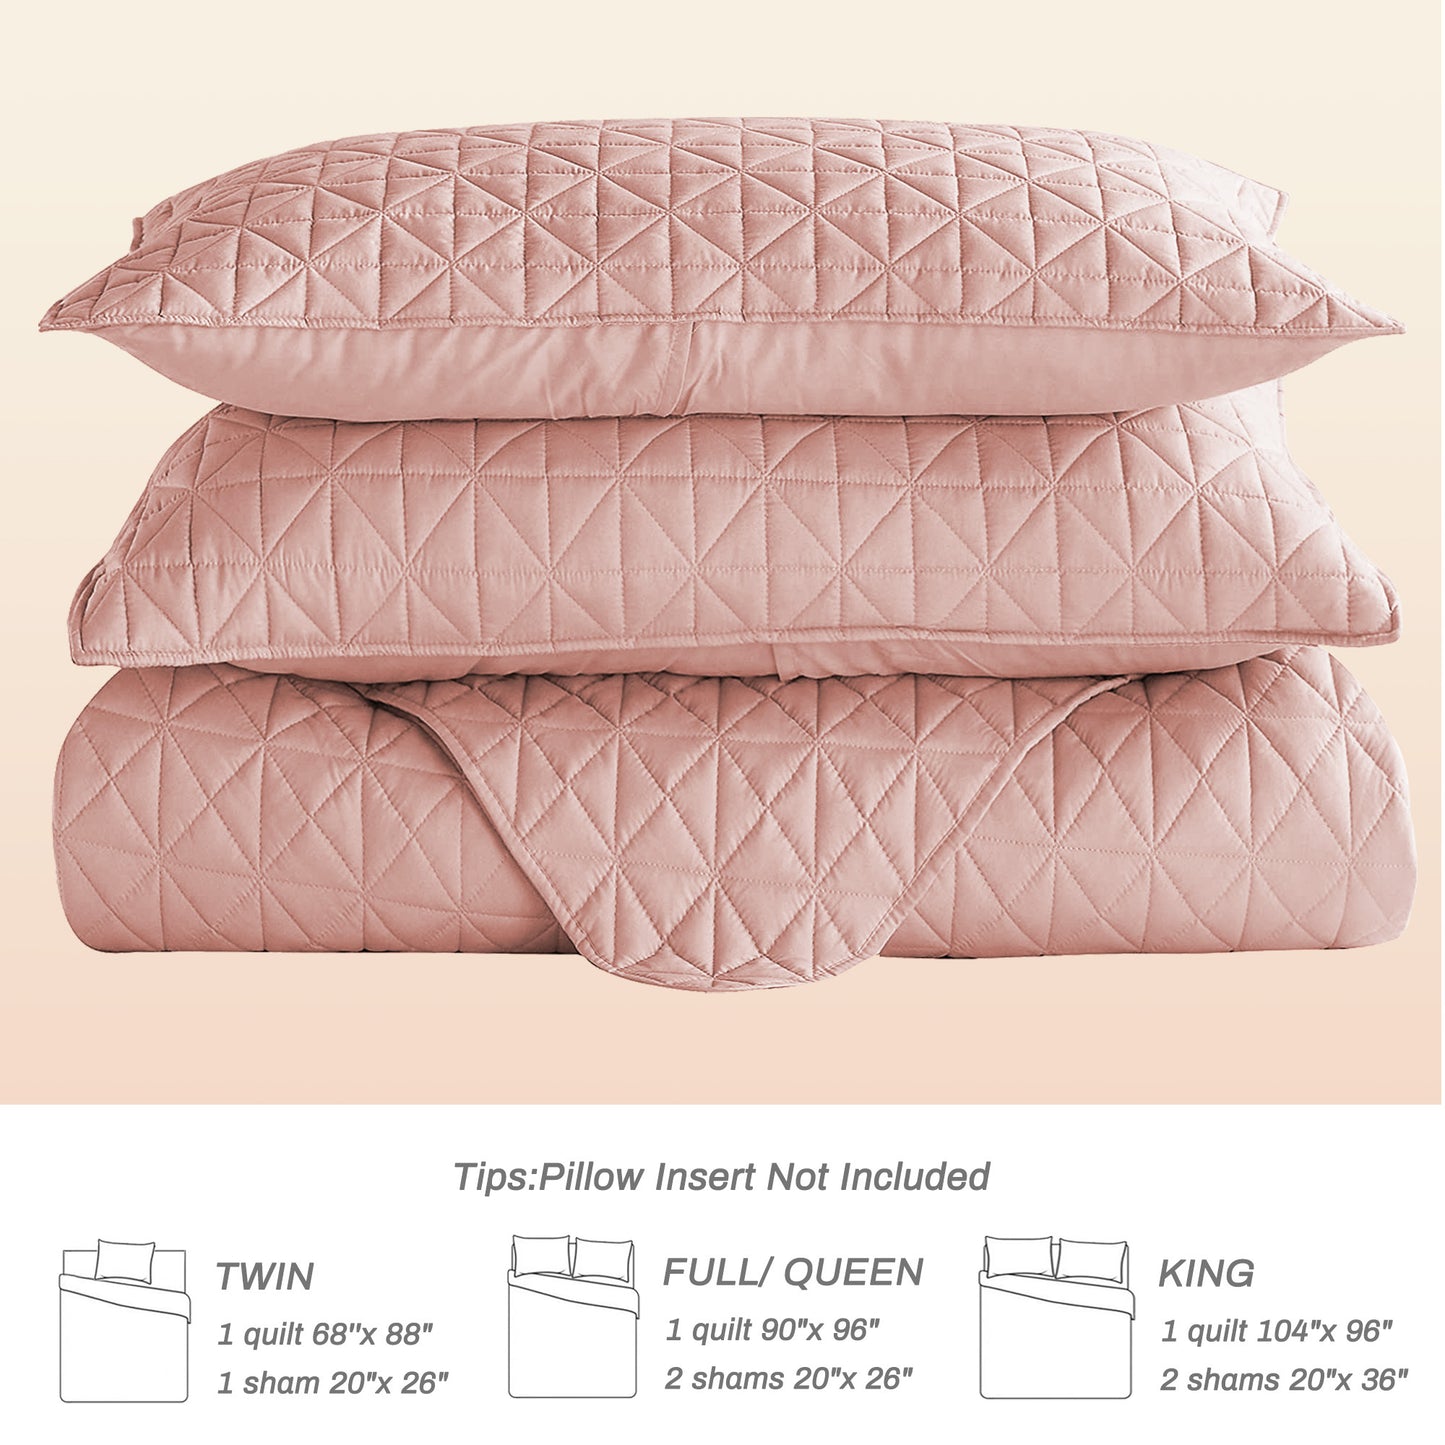 Exclusivo Mezcla King Size Quilt Bedding Set for All Seasons, Lightweight Soft Pink Quilts King Size Bedspreads Coverlets Bed Cover with Geometric Stitched Pattern, (1 Quilt, 2 Pillow Shams)